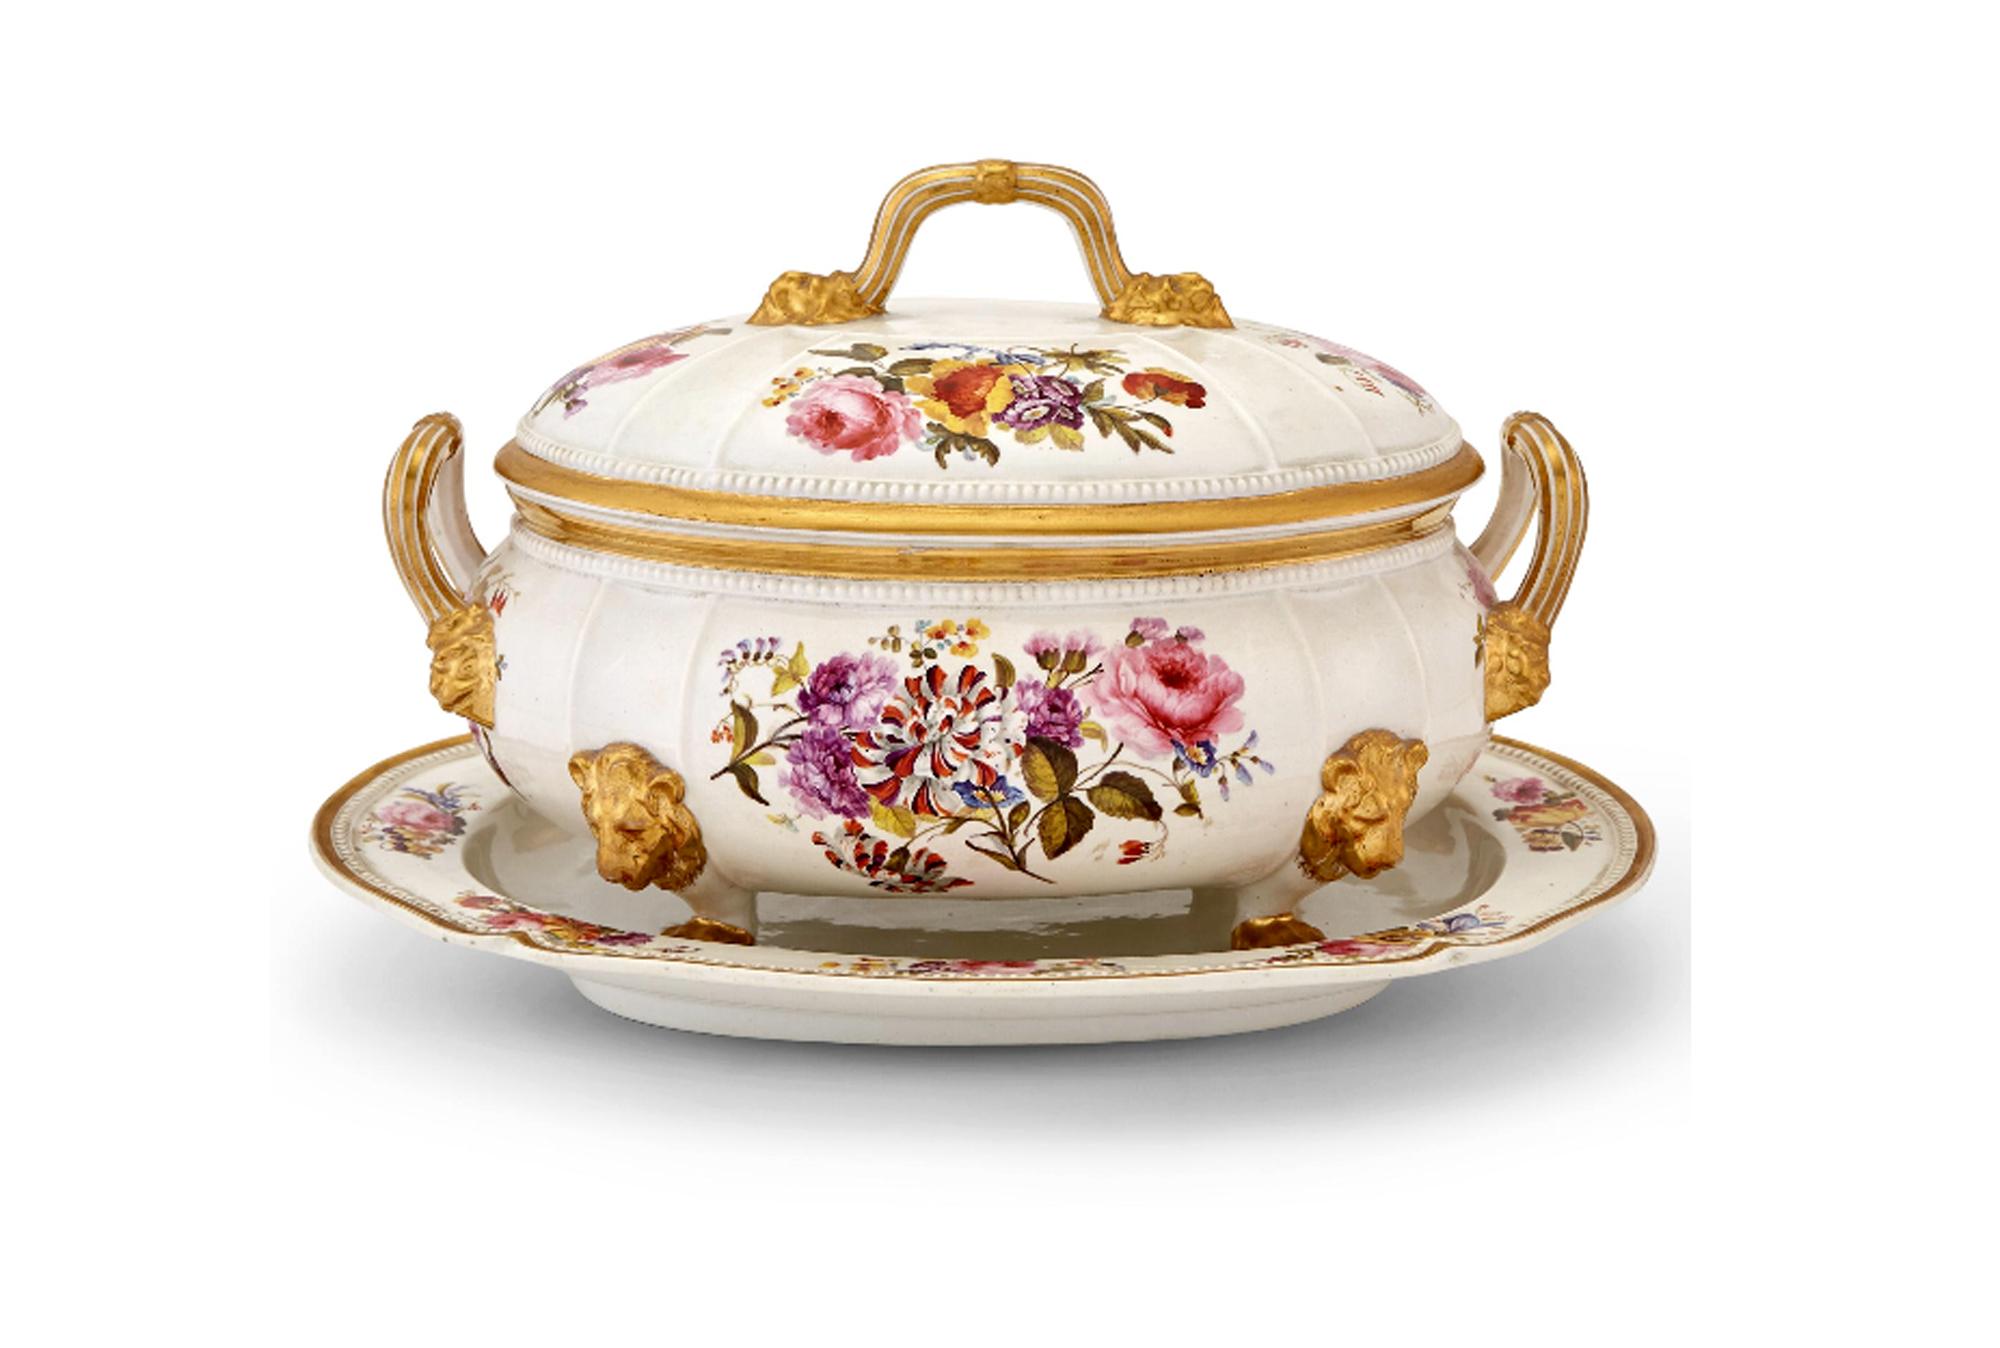 Derby Porcelain Large Botanical Soup Tureen, Cover & Stand,
Circa 1815-25

The Derby porcelain soup tureen, cover and stand are finely painted with exuberantly styled groupings of flowers to four sides, around the rim of the stand and on the cover. 